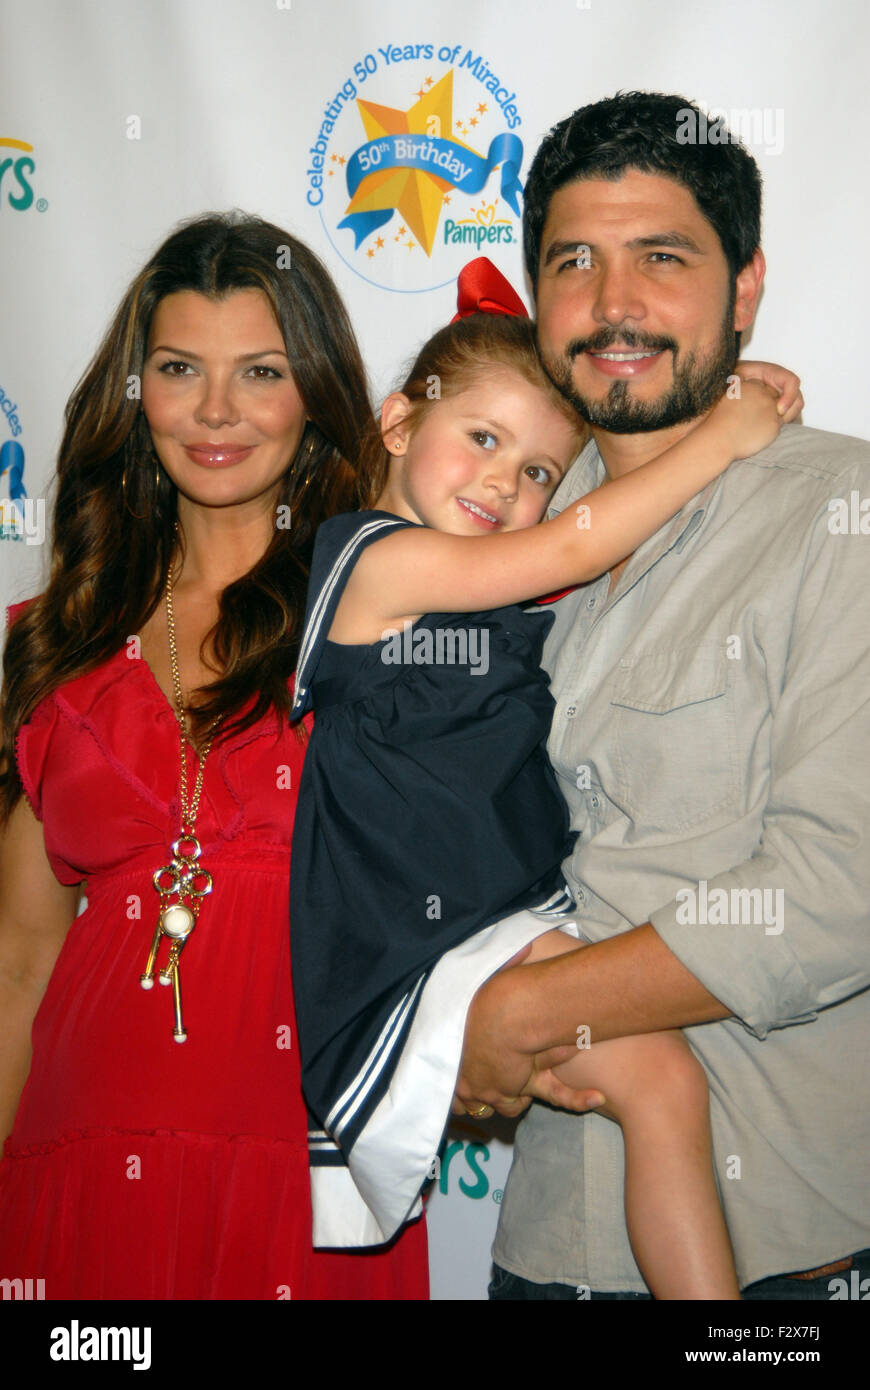 File. 24th Sep, 2015. Former Miss USA Ali Landry's father-in-law and brother-in-law of were found dead in Mexico after a kidnapping earlier in the month, according to People. Jose Manuel Gomez Fernandez and Juan Manuel Gomez Monteverde are the father and brother of Landry's husband, acclaimed director Alejandro Monteverde. Monteverde's brother, Juan Manuel, was a business partner at 'La Pecerita,' previously known as 'El Callej—n de los Milagros' in Tampico, Tamaulipas, a restaurant that has allegedly reported drug cartel activity in the past. It is wellÊknownÊthat the south of Tamaulipas an Stock Photo